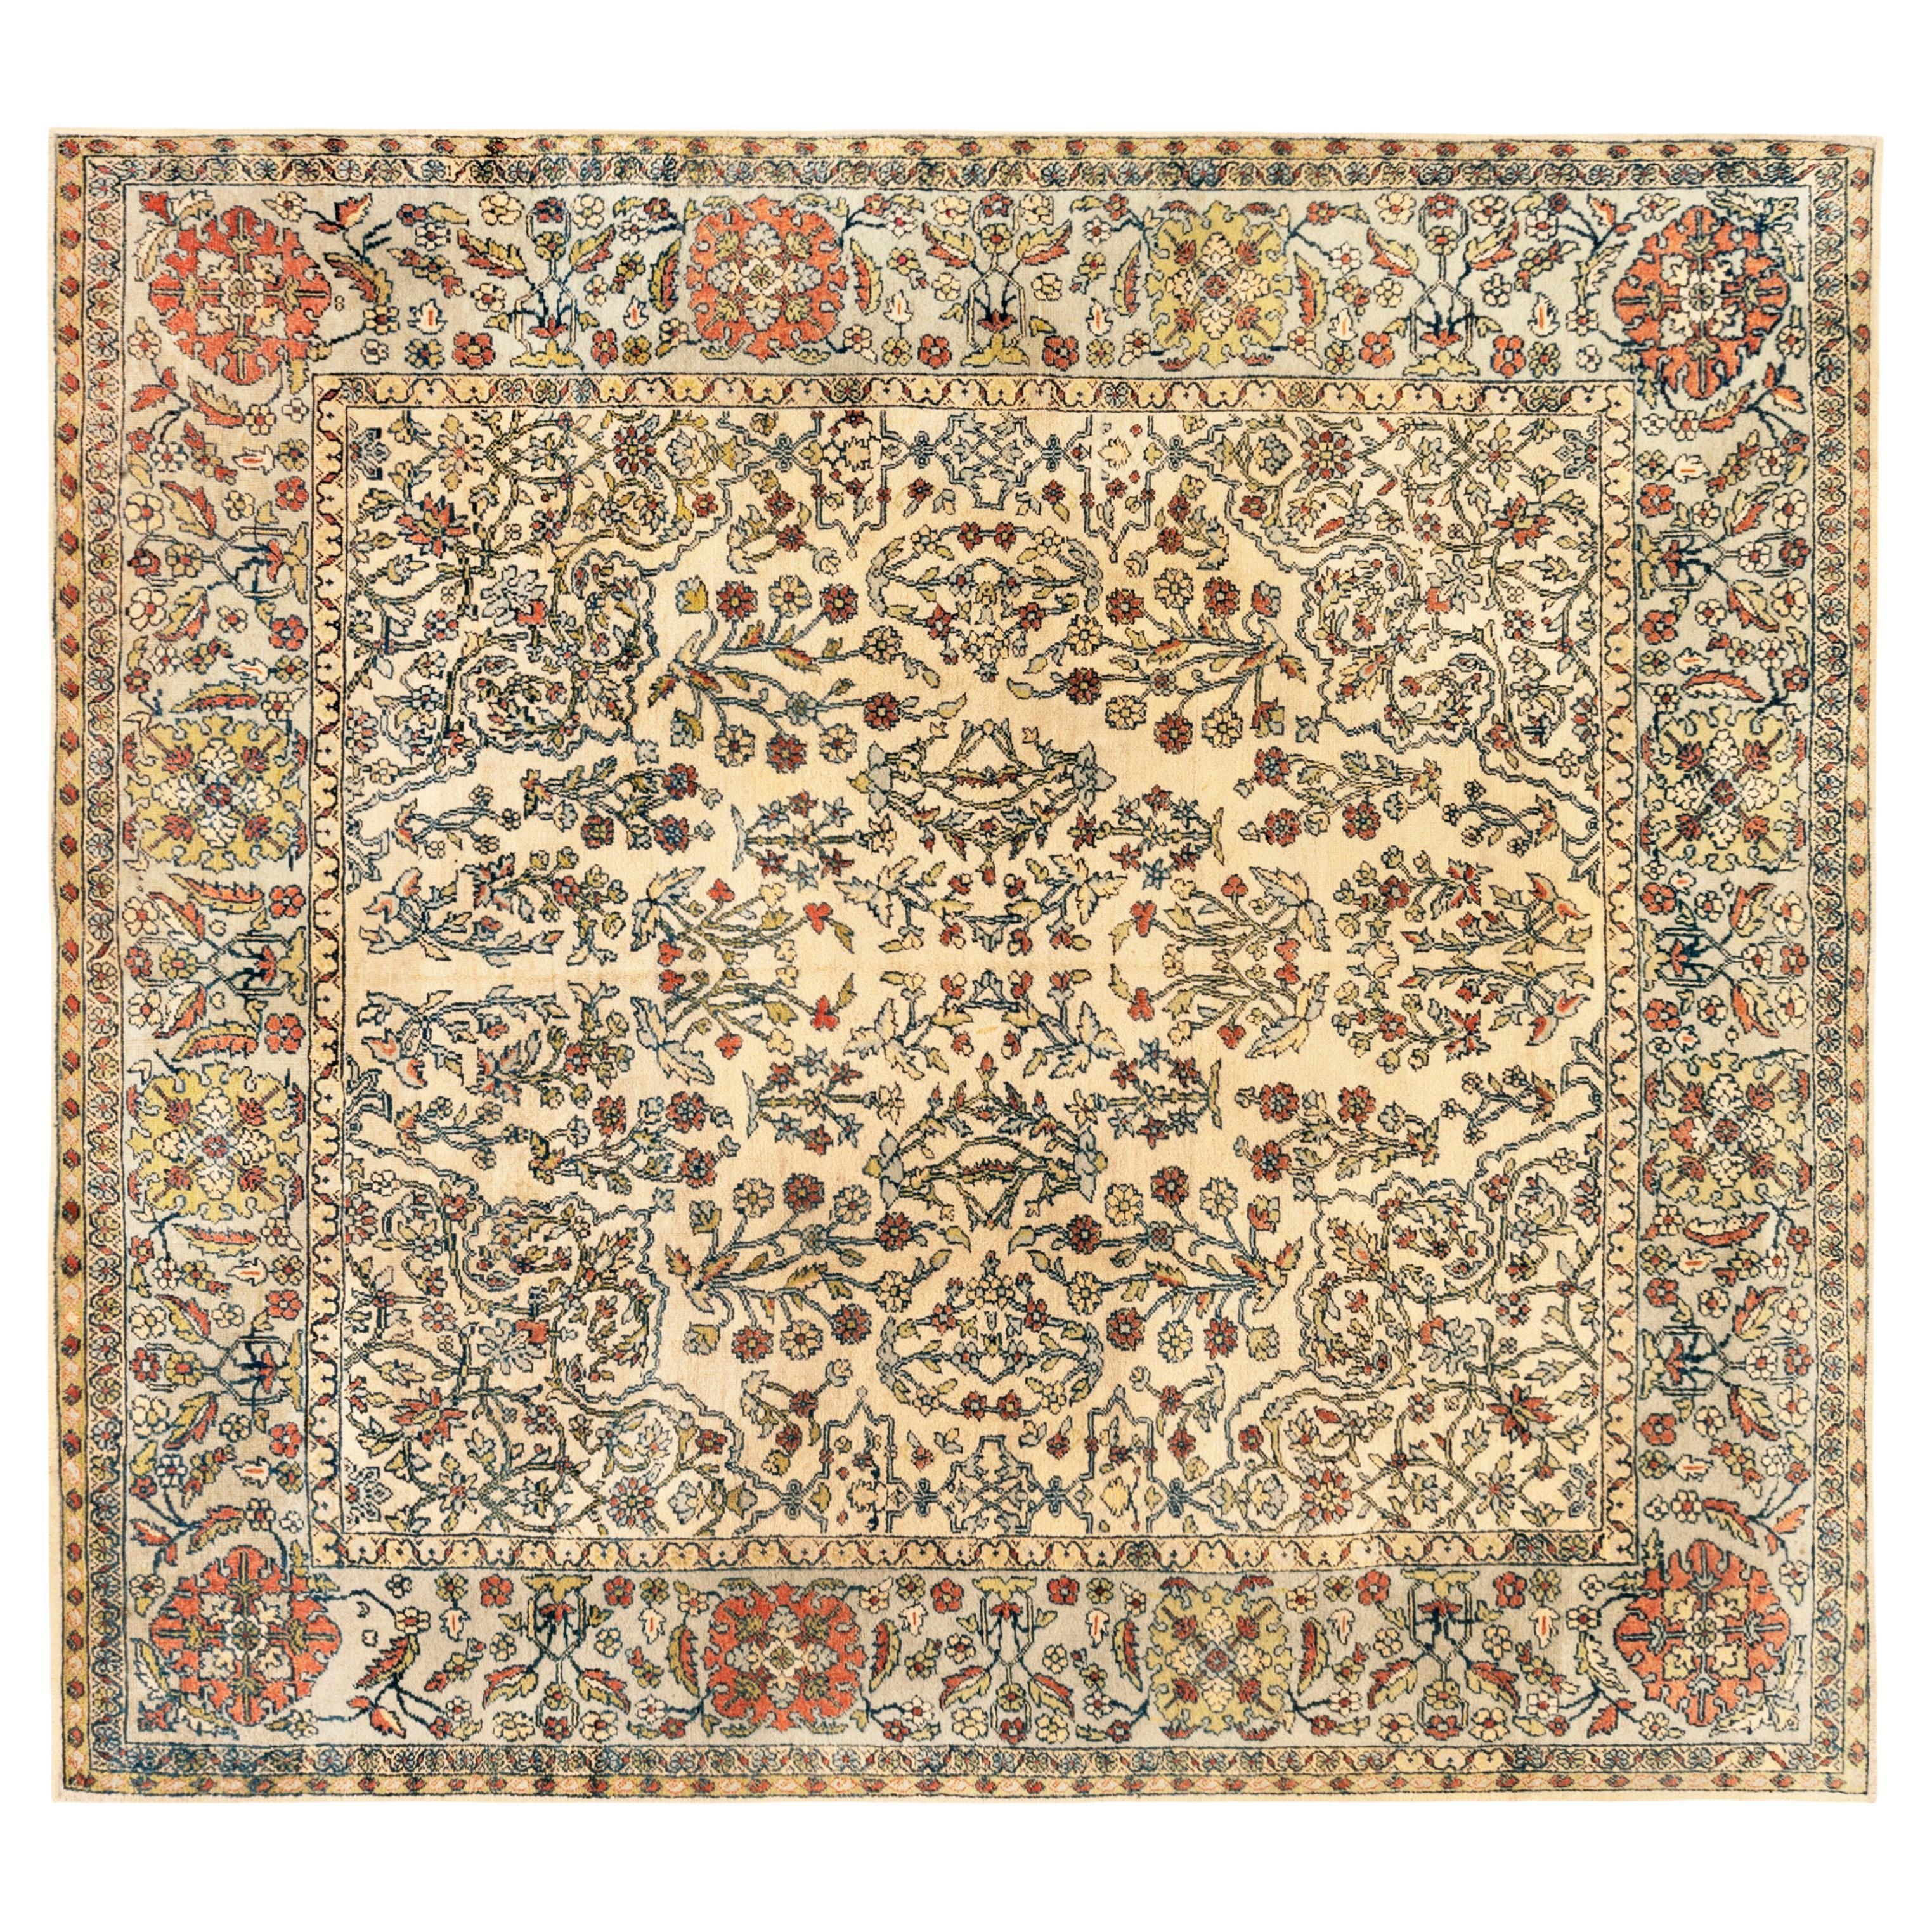 Antique Persian Sultanabad Oriental Carpet, Room Size, with Floral Elements